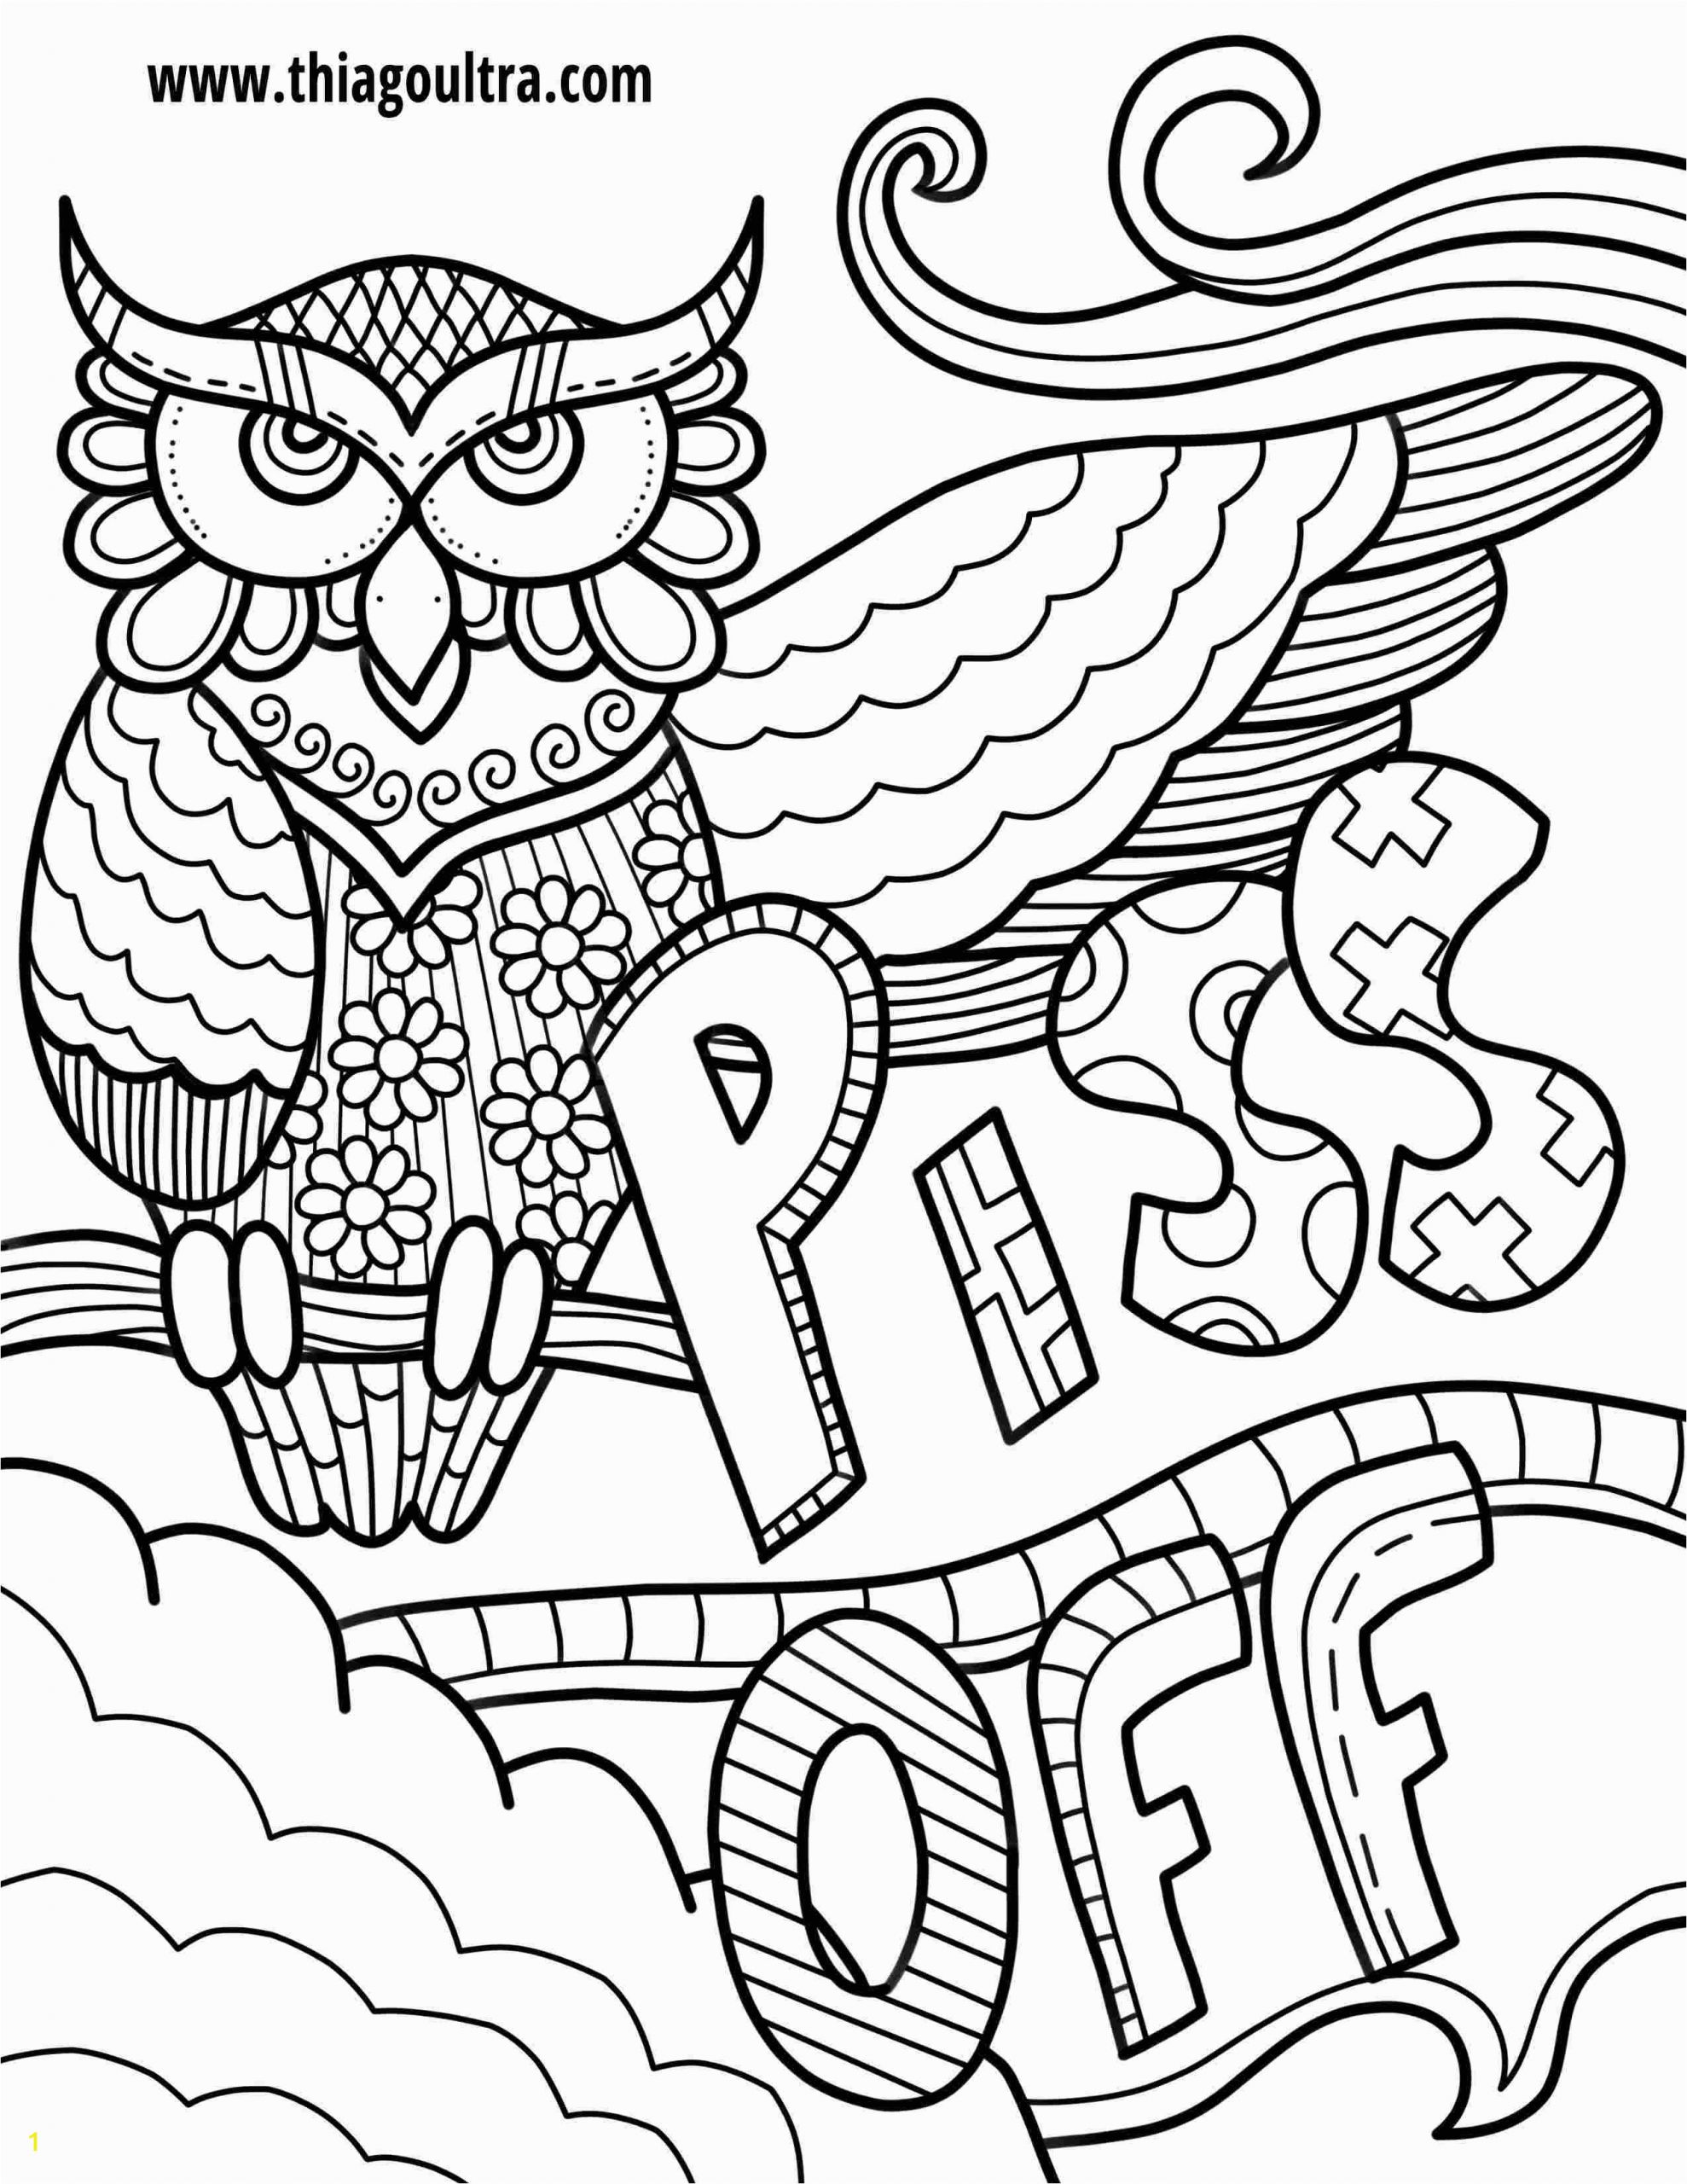 Free Printable Coloring Pages for Adults Only Swear Words Pdf | divyajanan